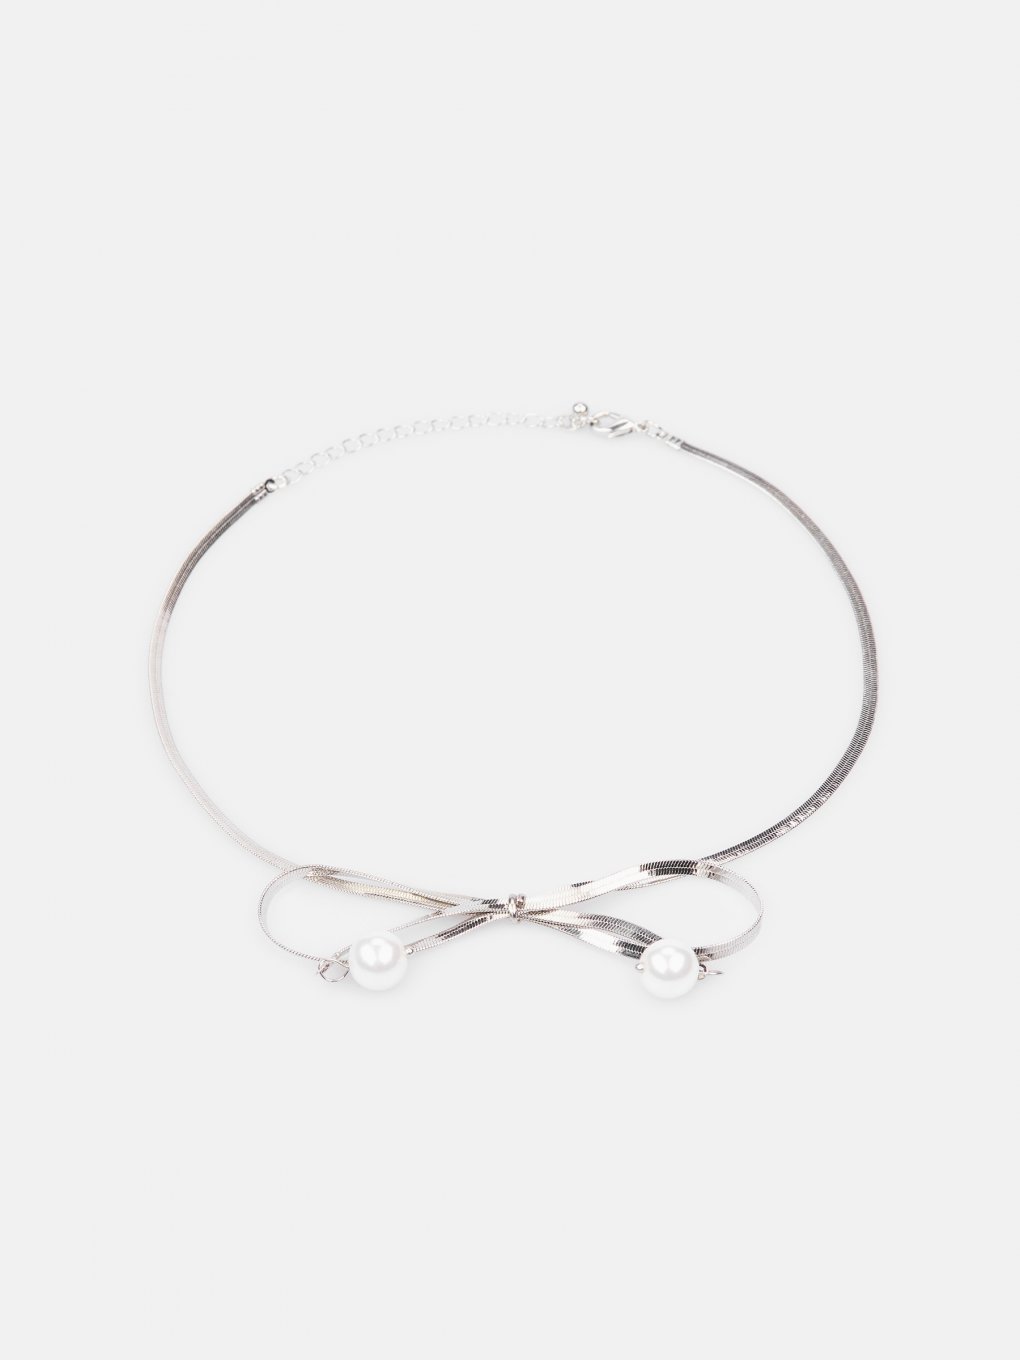 Bow shaped choker necklace with faux pearls